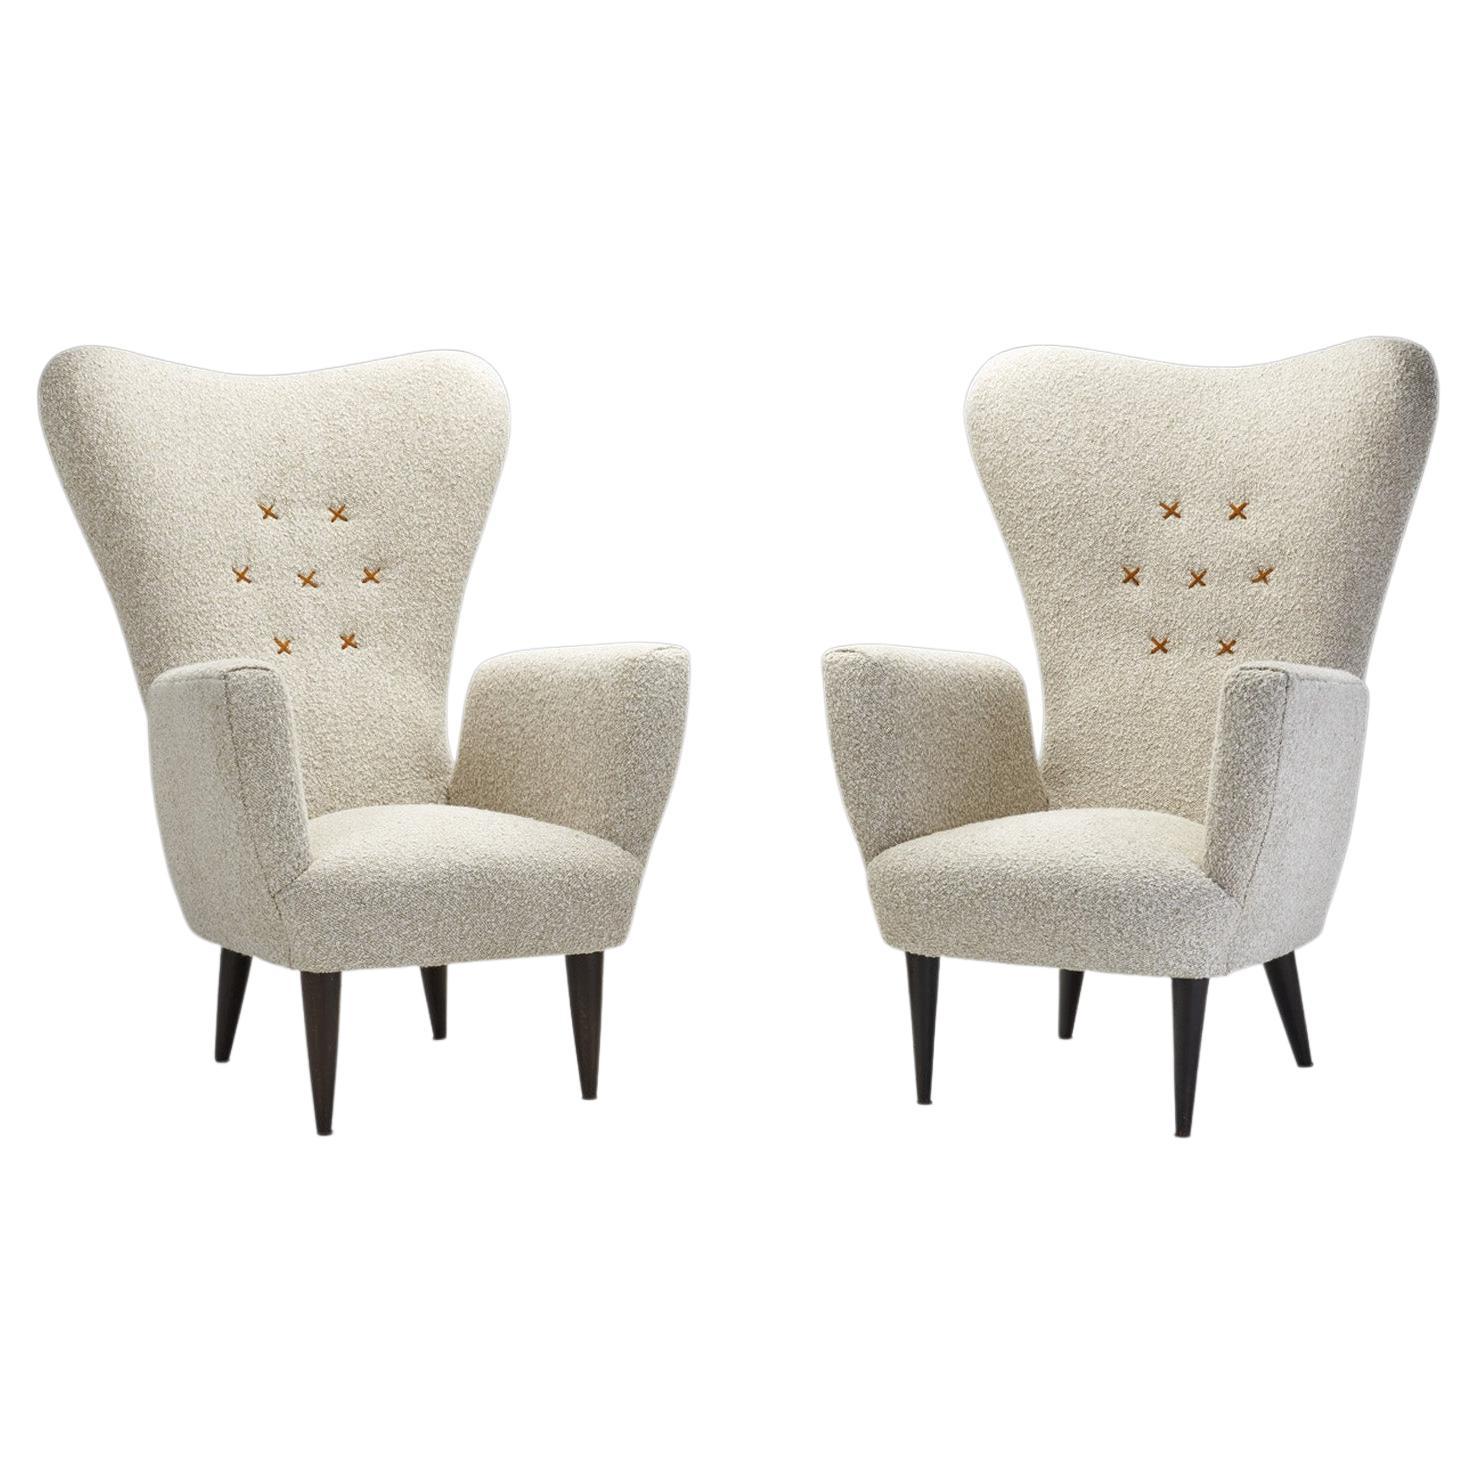 Italian Modern Upholstered High-Back Armchairs with Cross Stitches, Italy 1960s For Sale